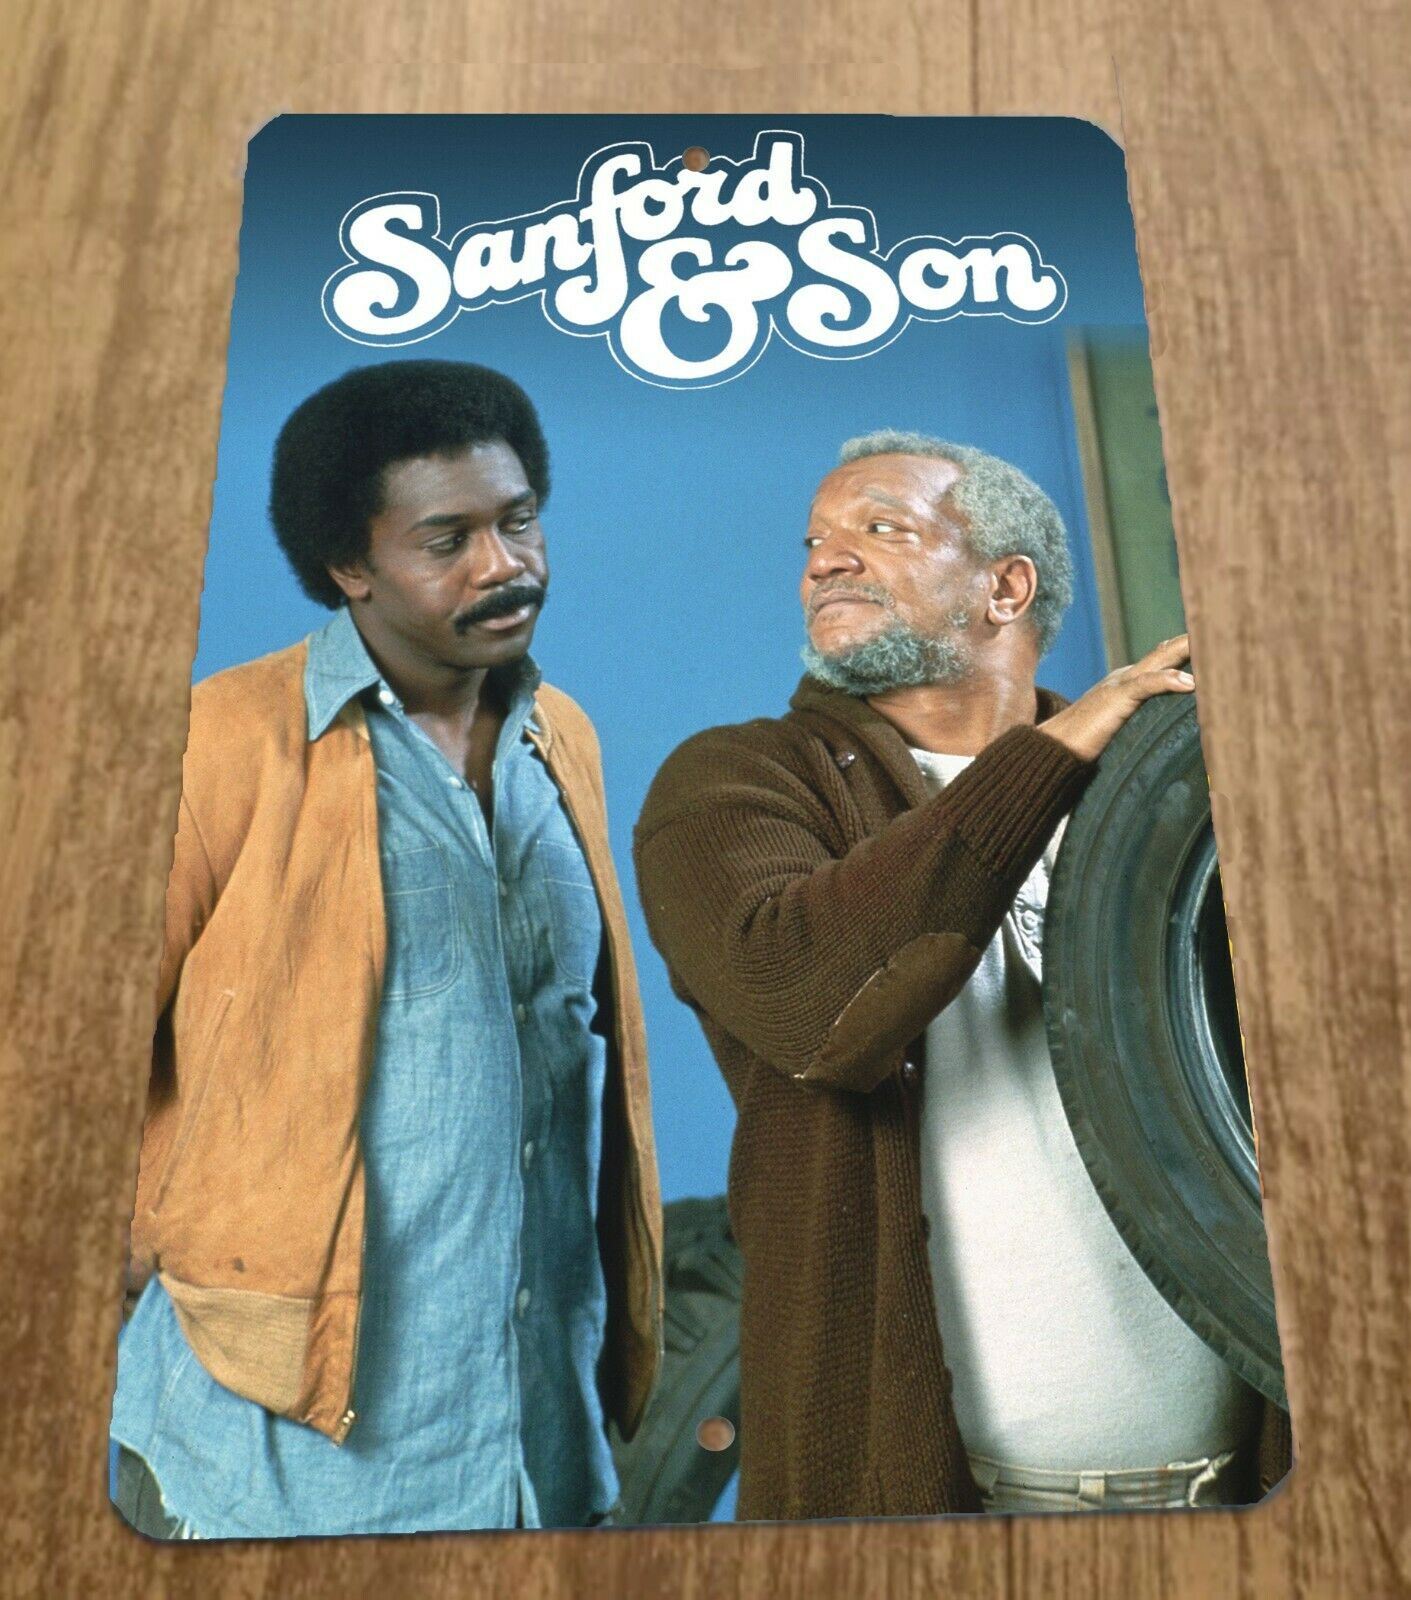 Sanford and Son Comedy TV Show 8x12 Metal Wall Sign